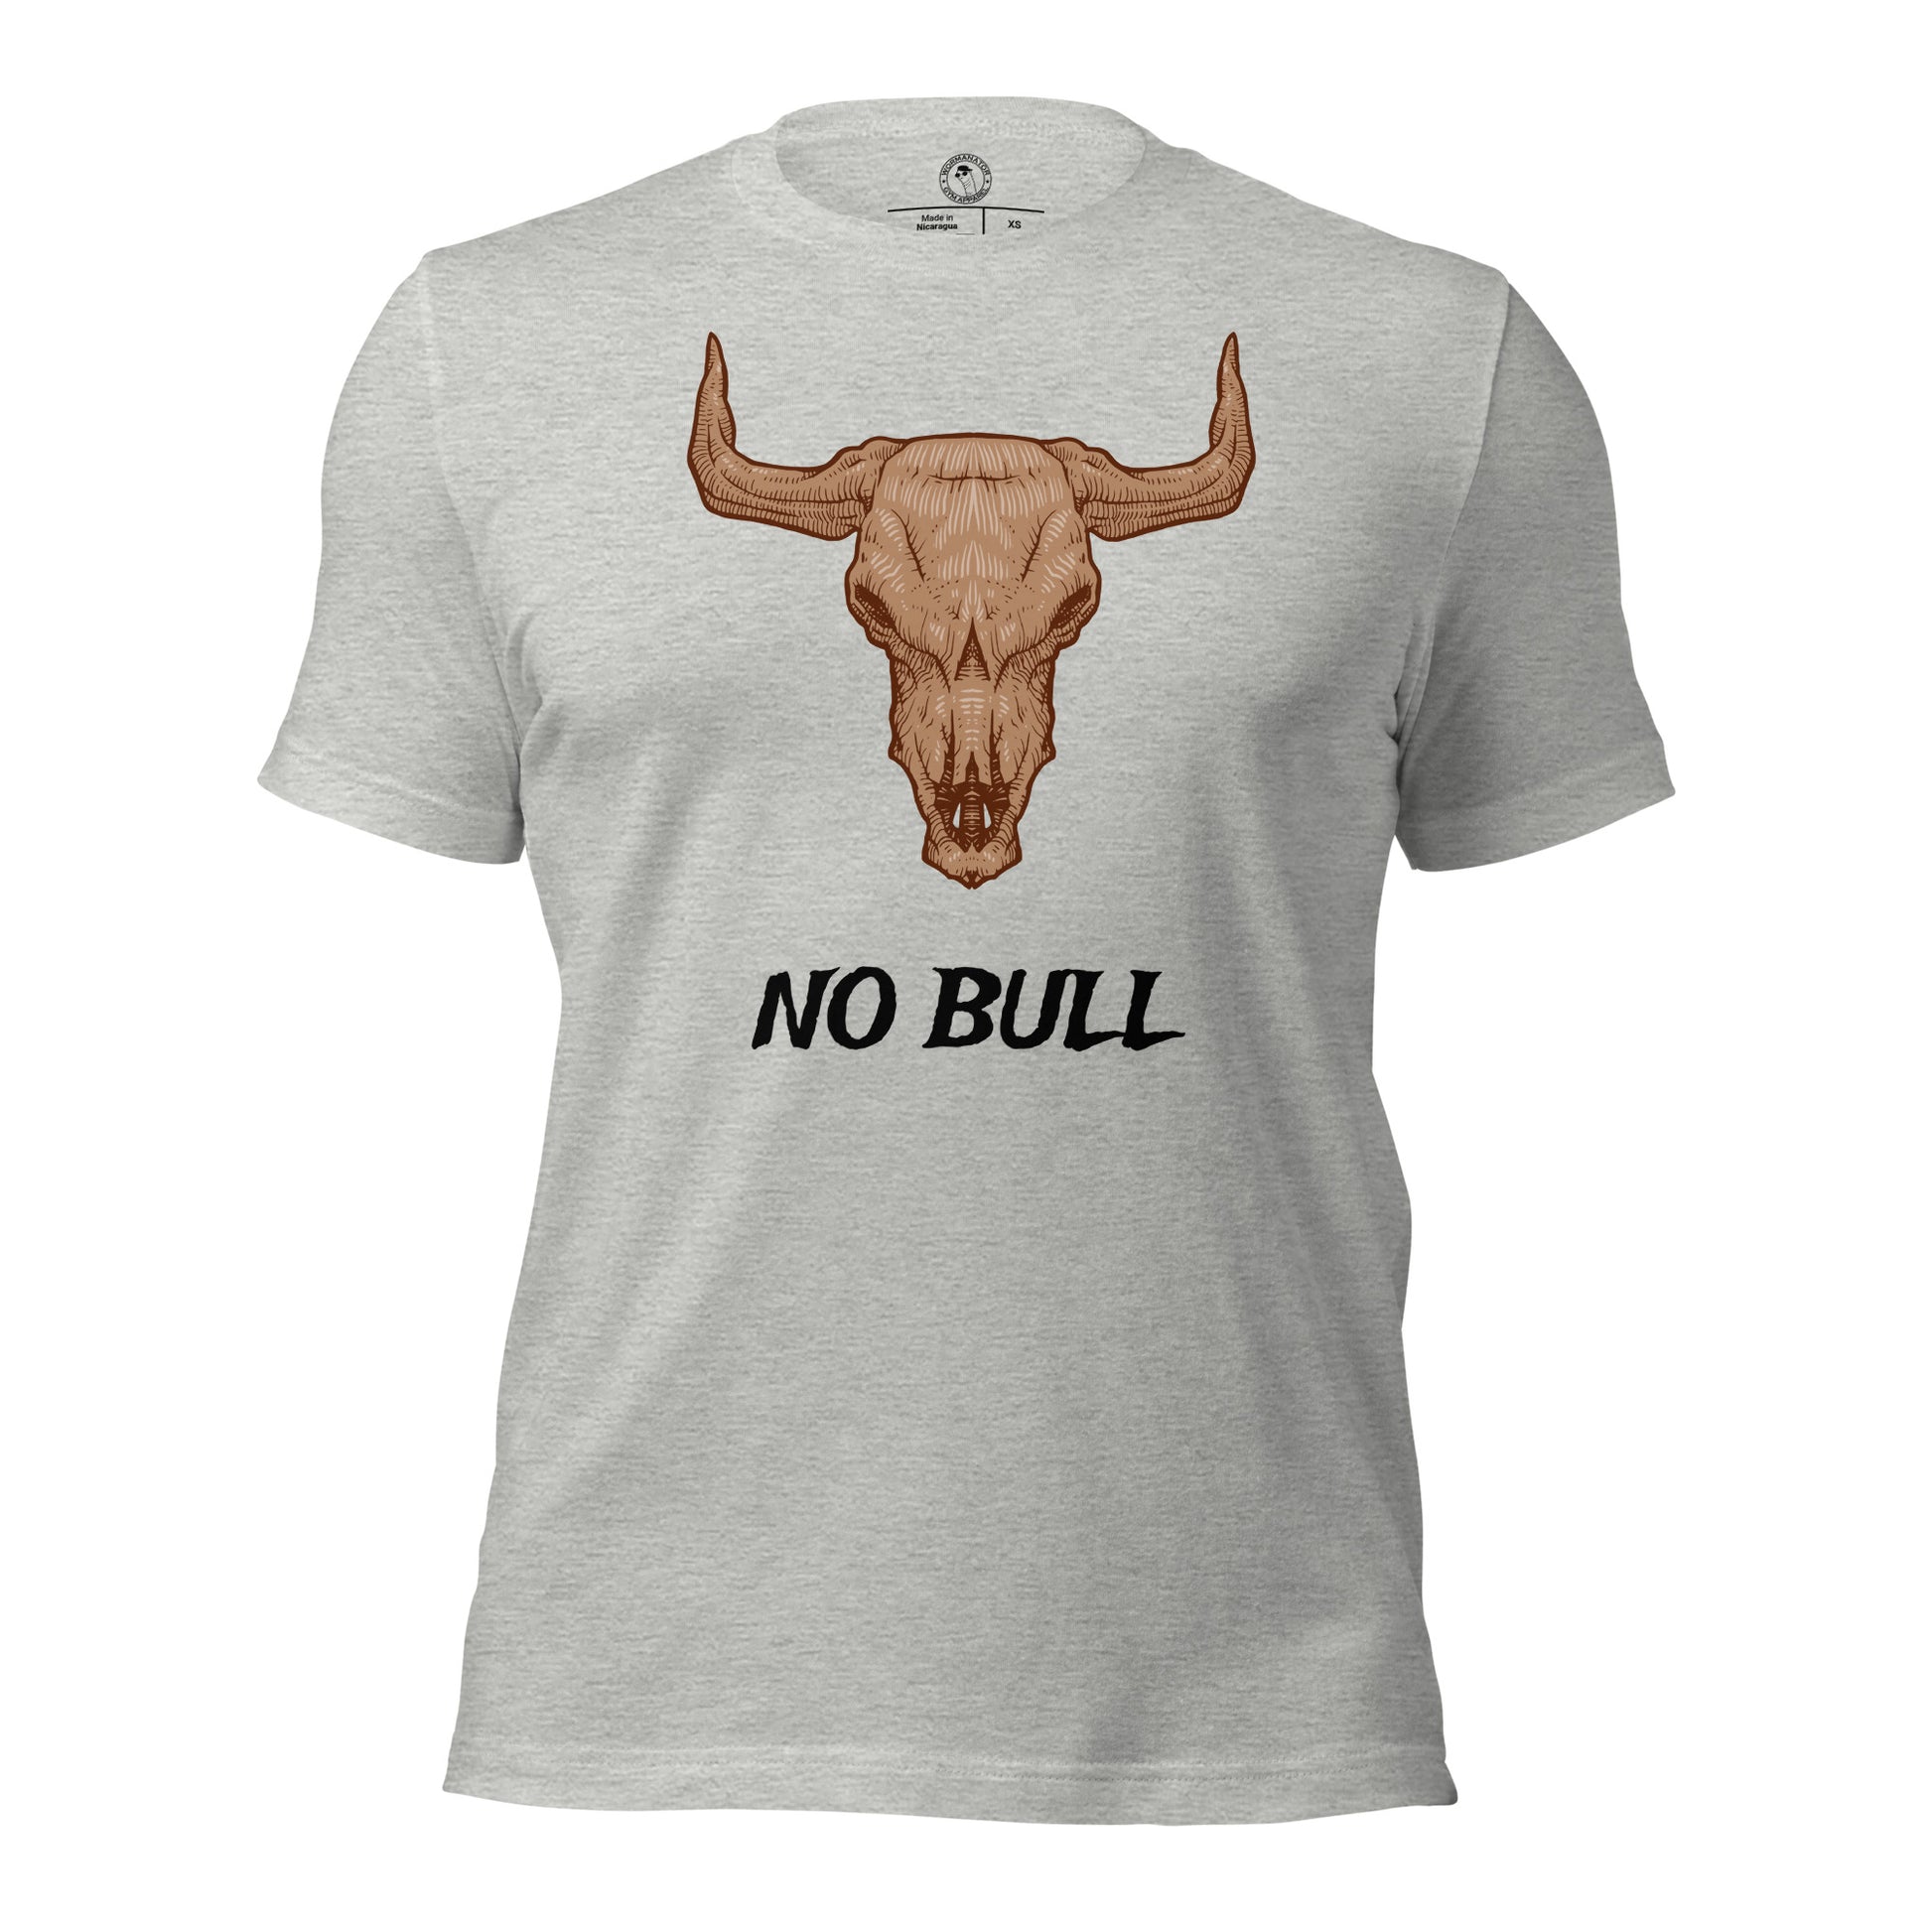 No Bull Shirt in Athletic Heather